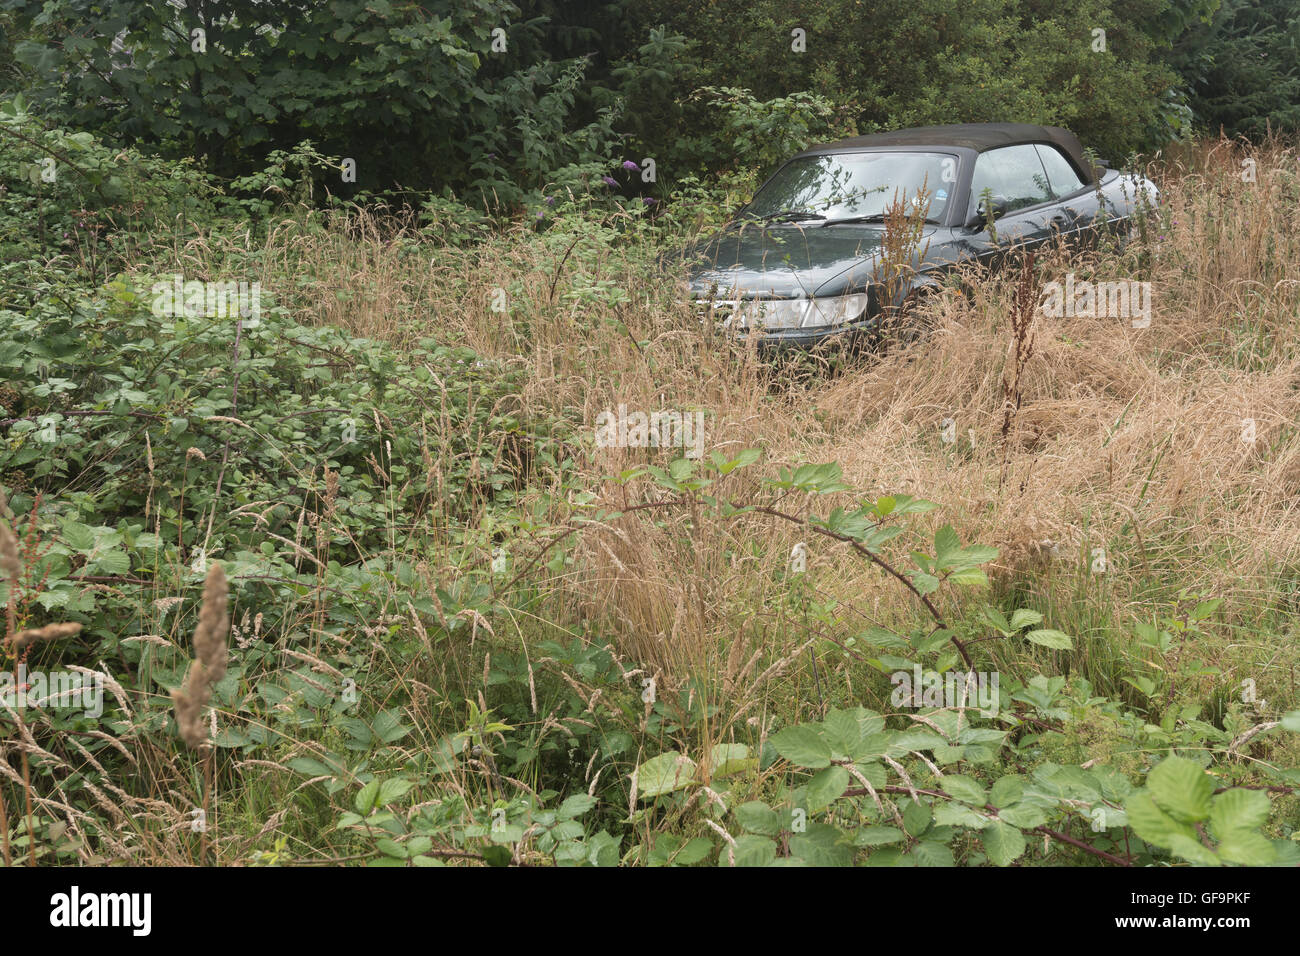 Abandoned car in overgrown field verge - concepts of recycling, waste, and environmental pollution, something abandoned, overgrown by weeds. Stock Photo